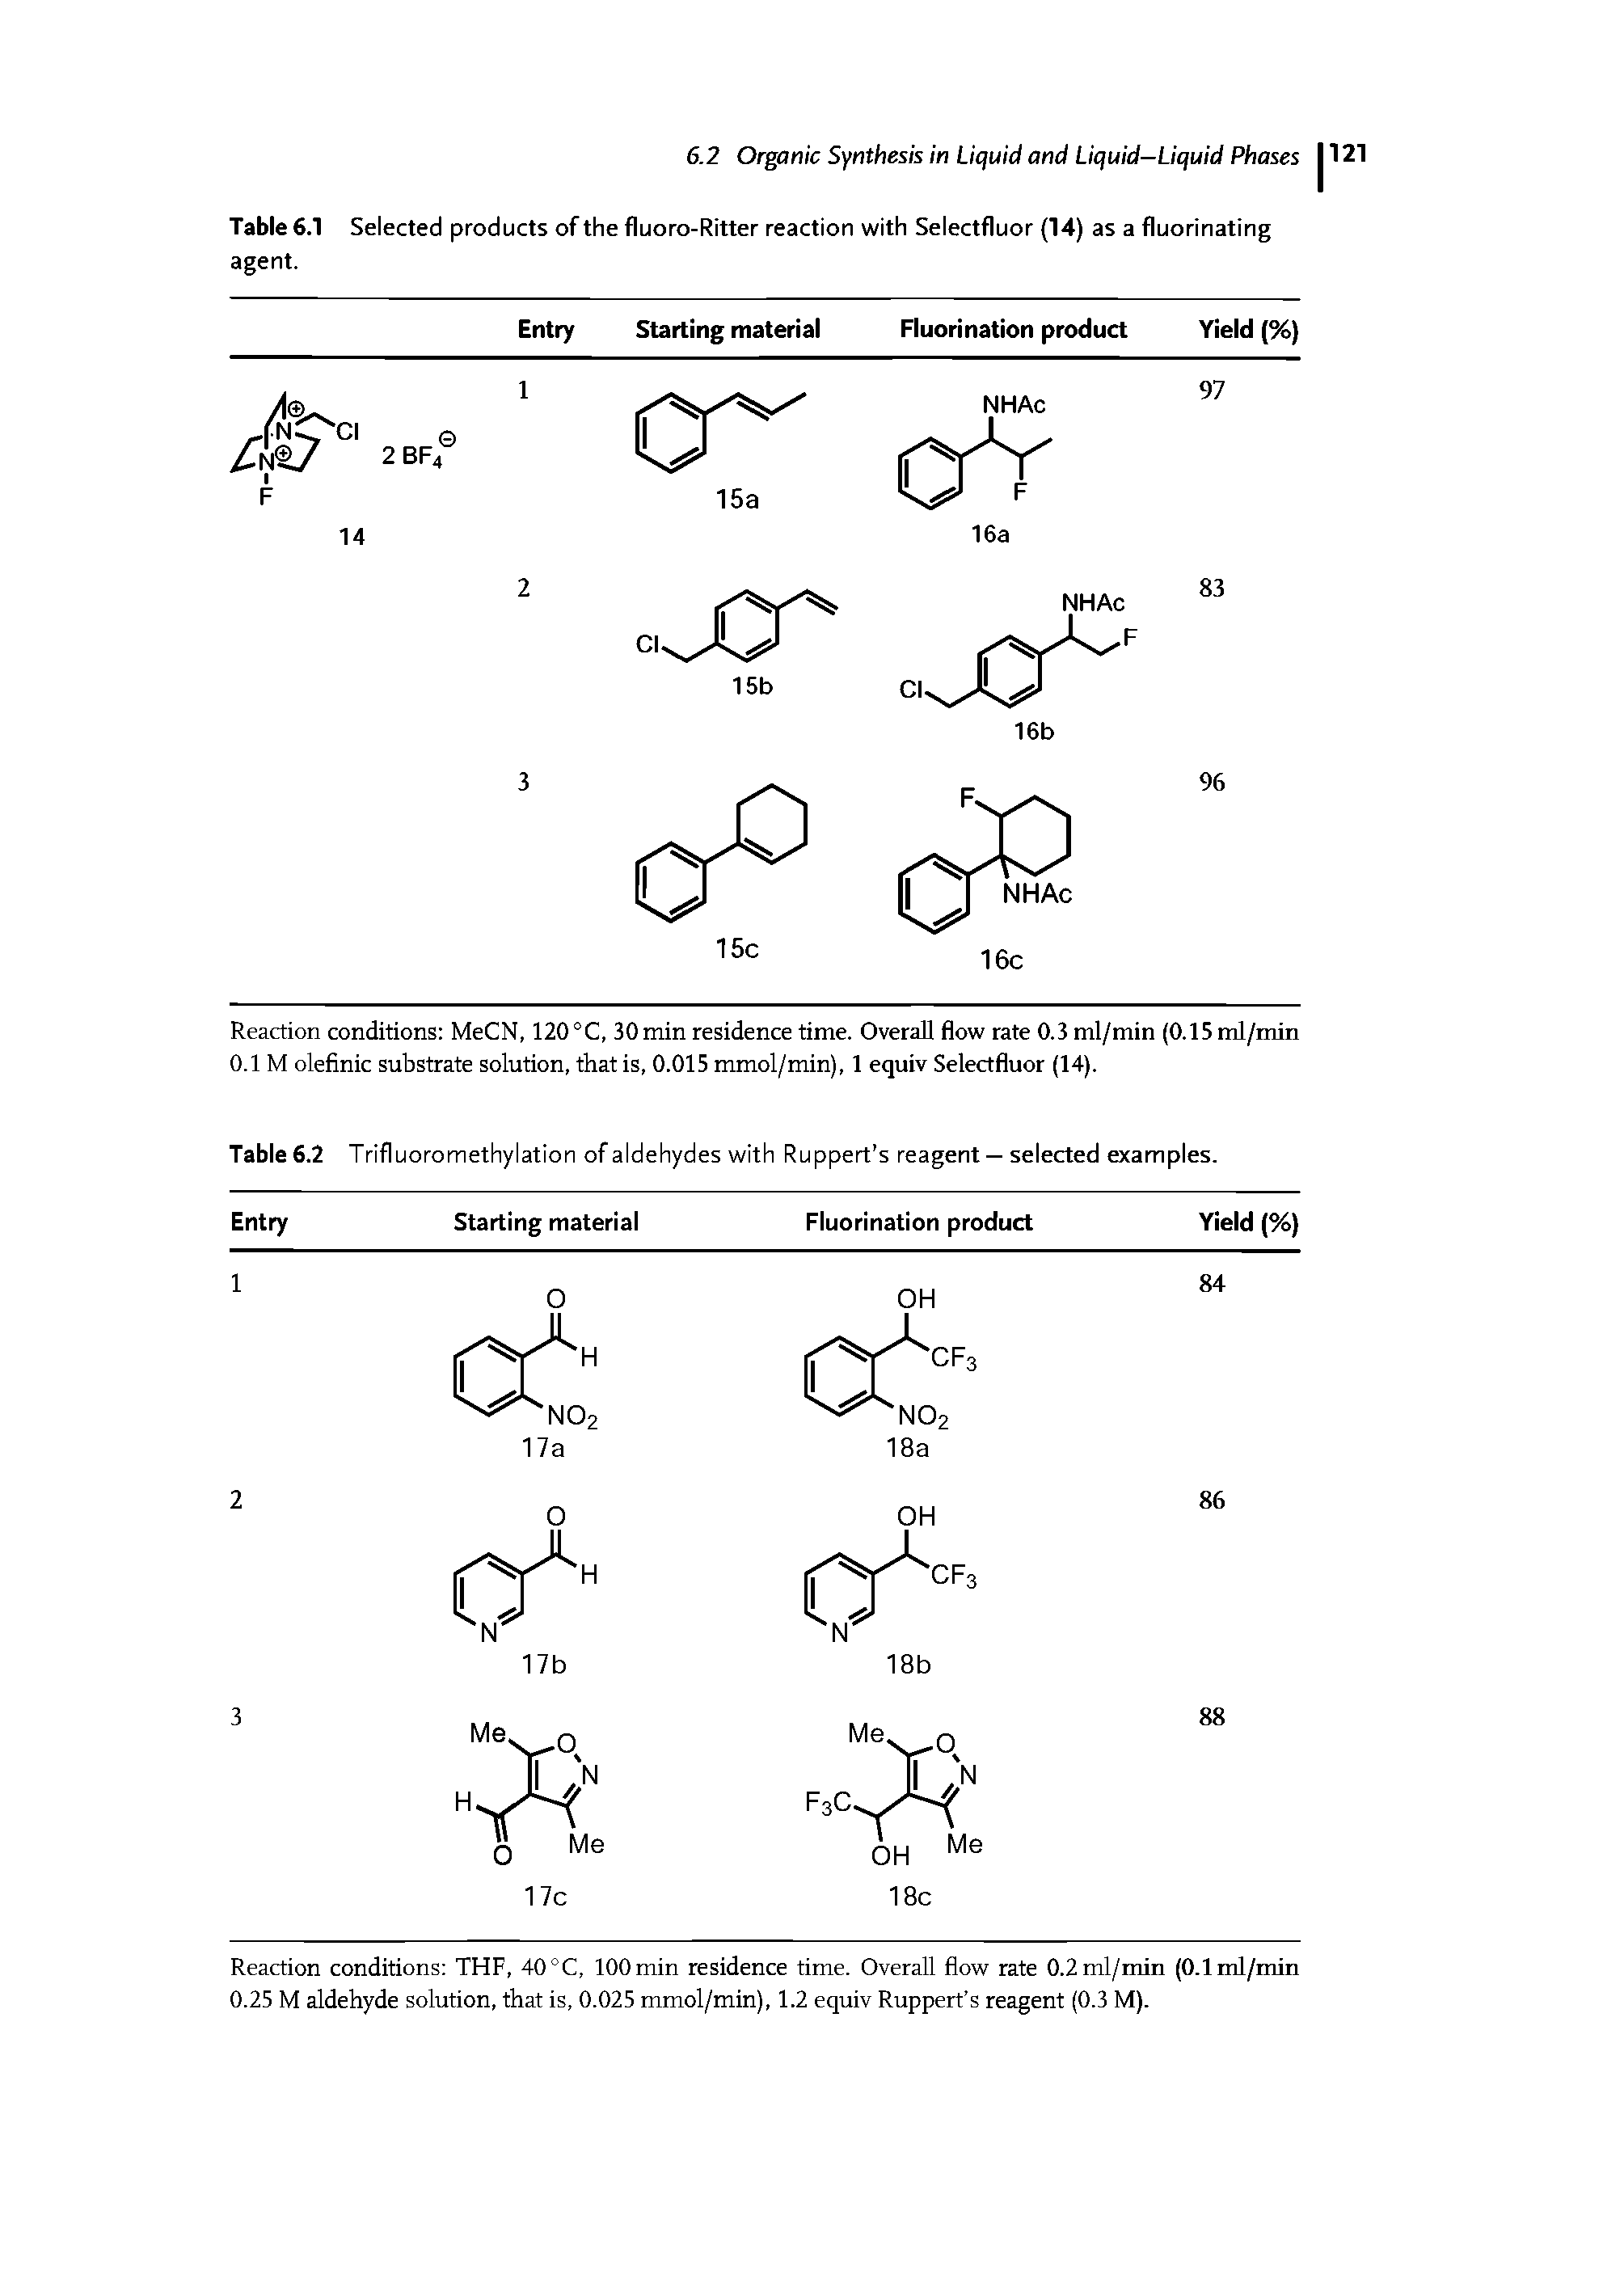 Table 6.2 Trifluoromethylation of aldehydes with Ruppert s reagent — selected examples.